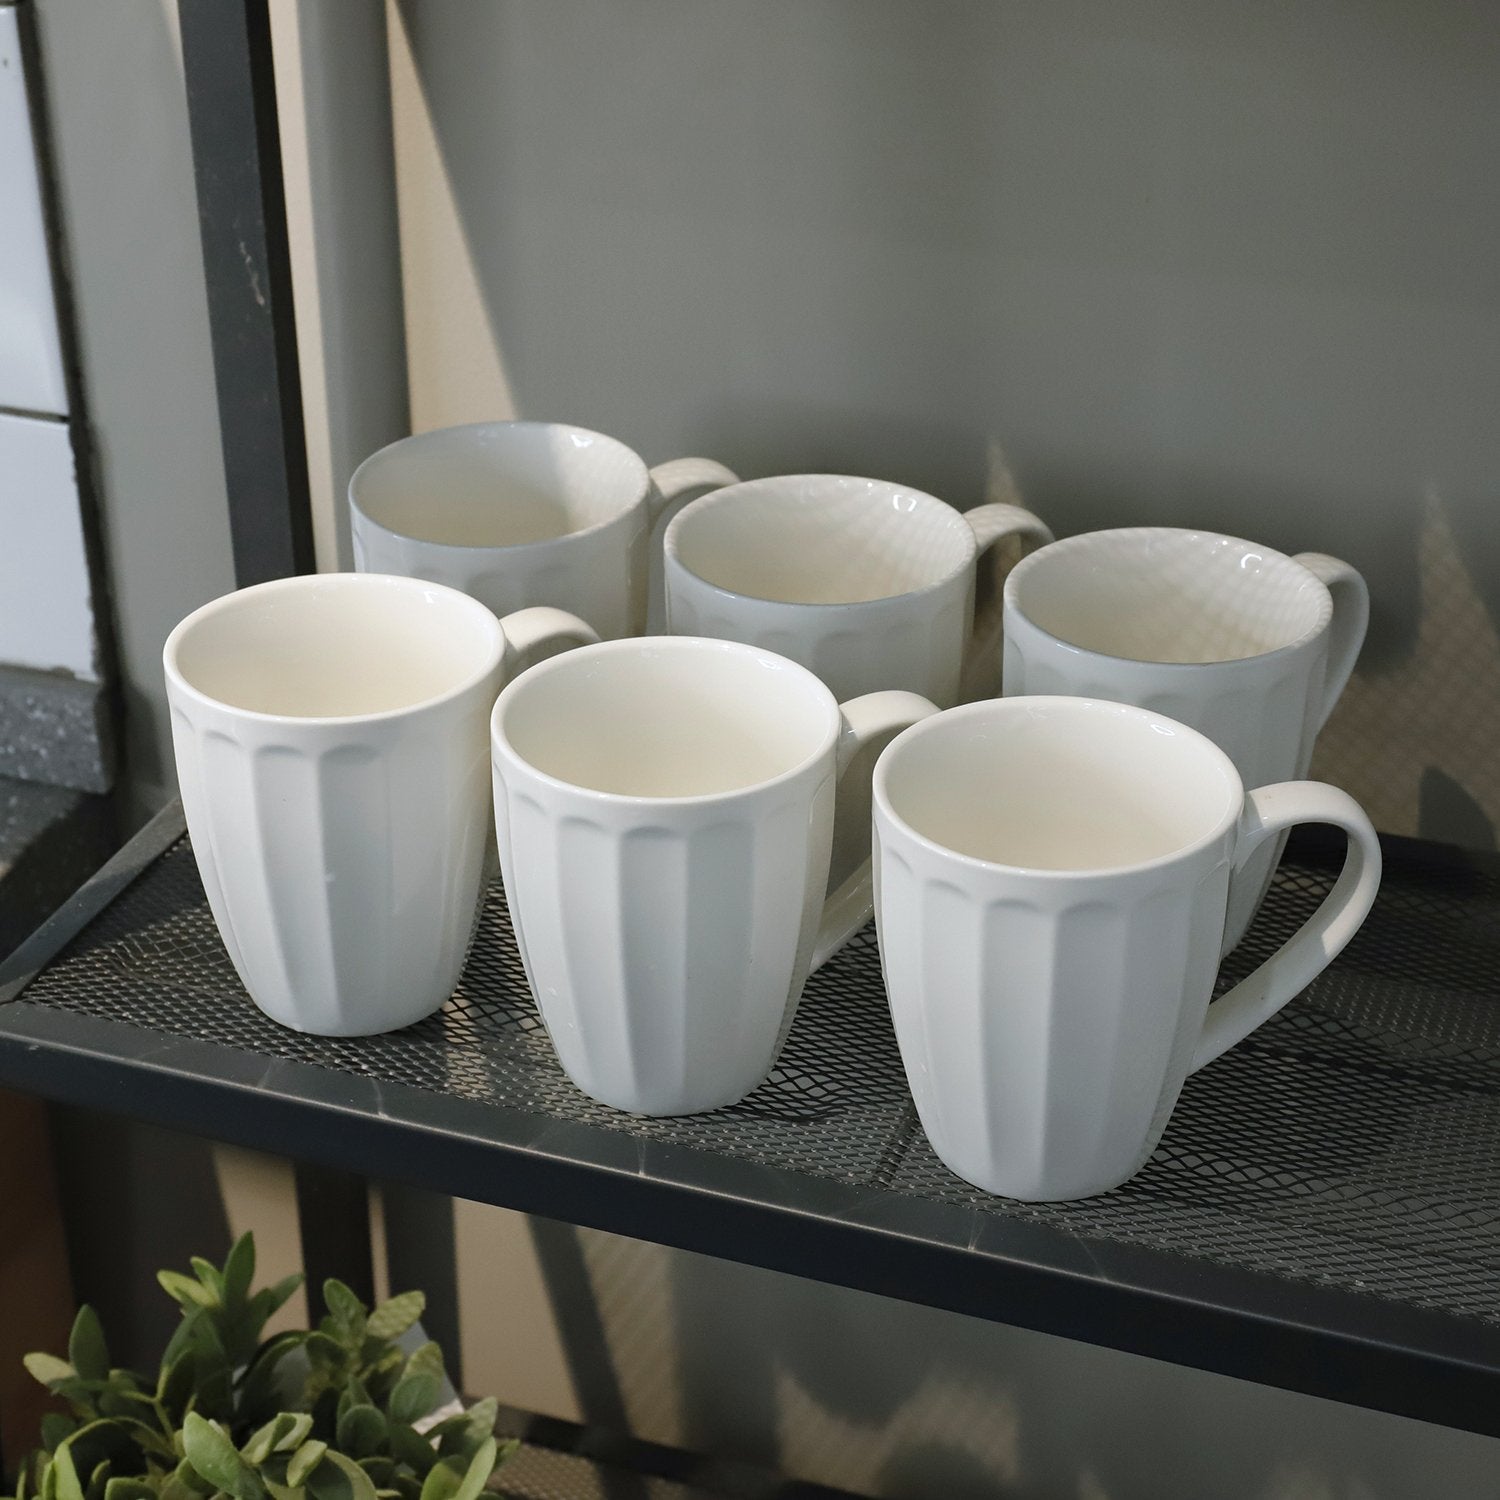 Sweese 602.102 Porcelain Fluted Mugs - 14 Ounce Coffee Cup Set for